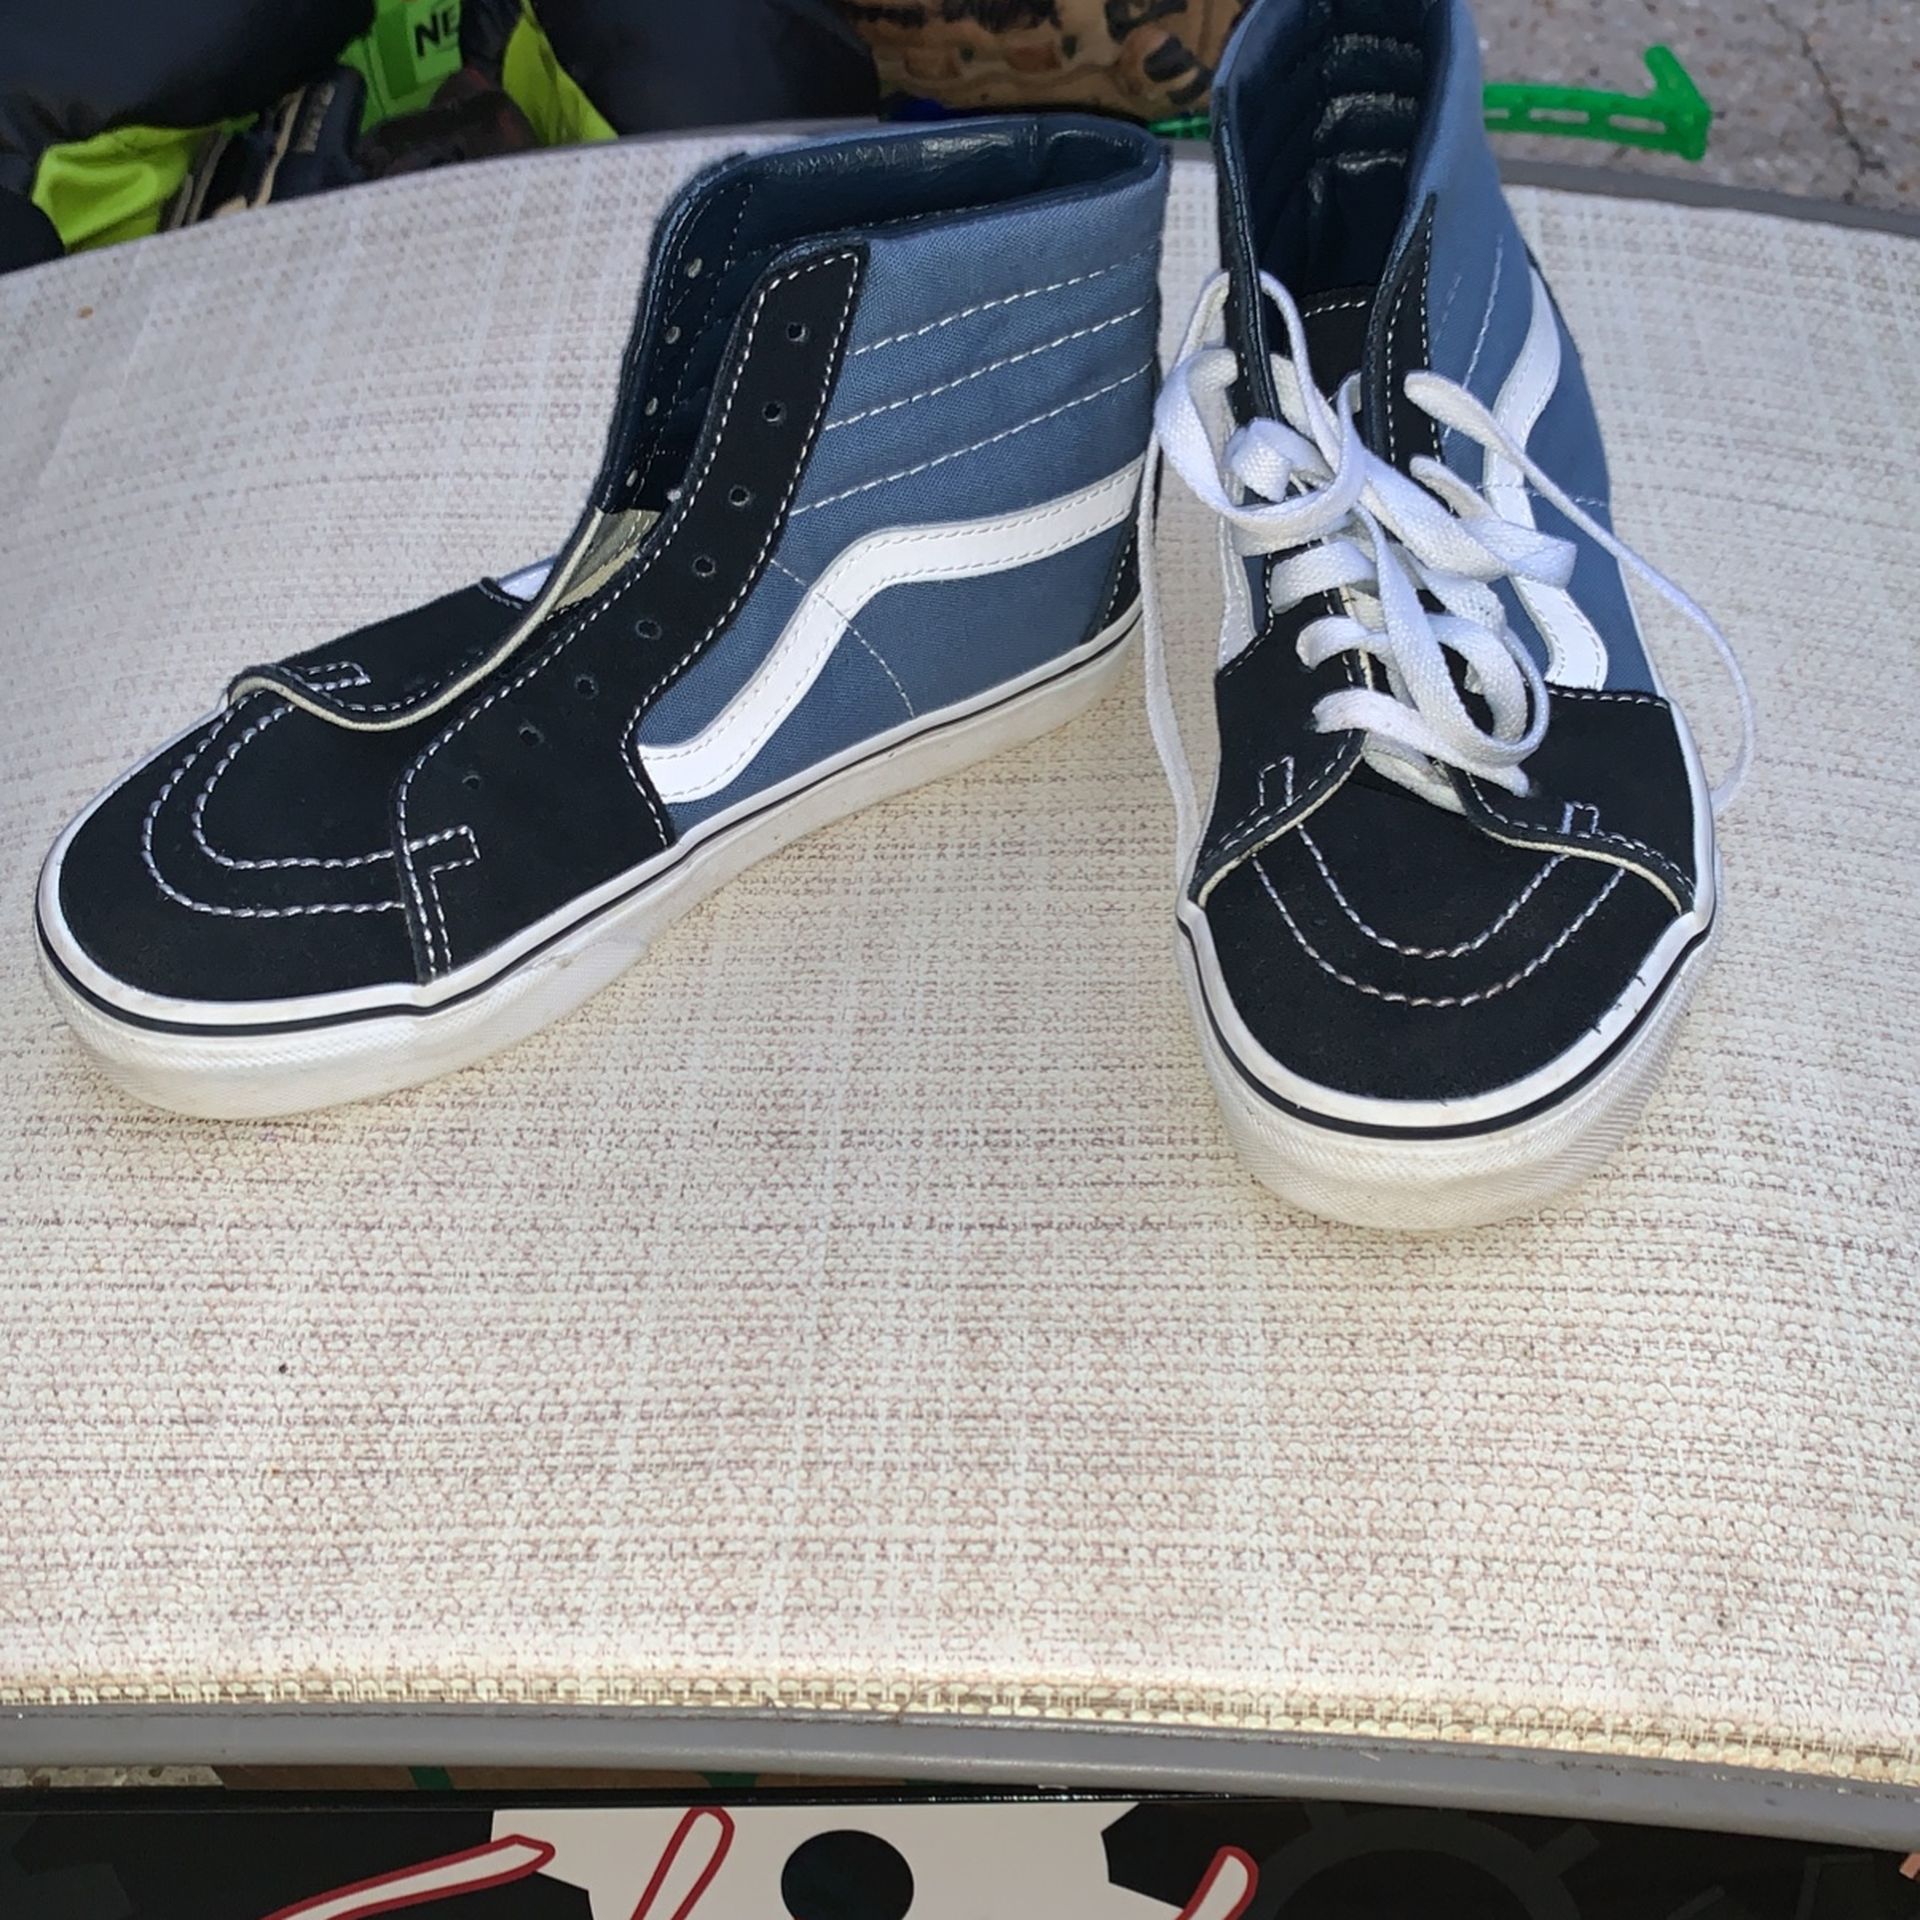 Vans High Tops -Size 4.5 Youth